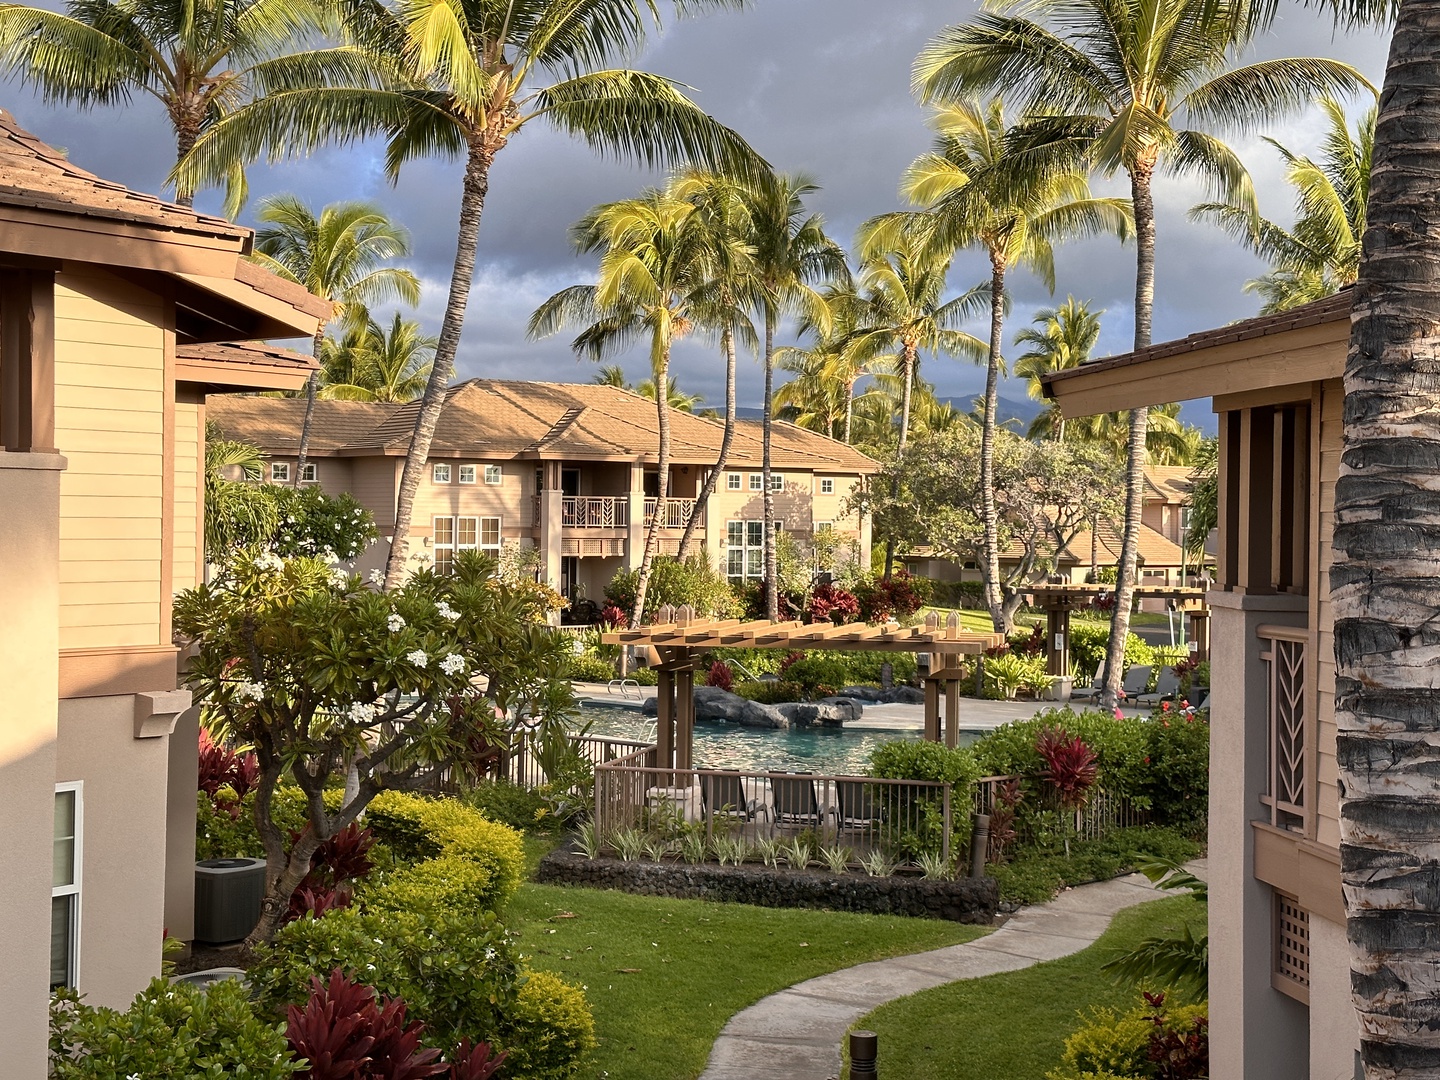 Waikoloa Vacation Rentals, Waikoloa Colony Villas 2101 - Close to main pool that has a jacuzzi and communal gas grills.